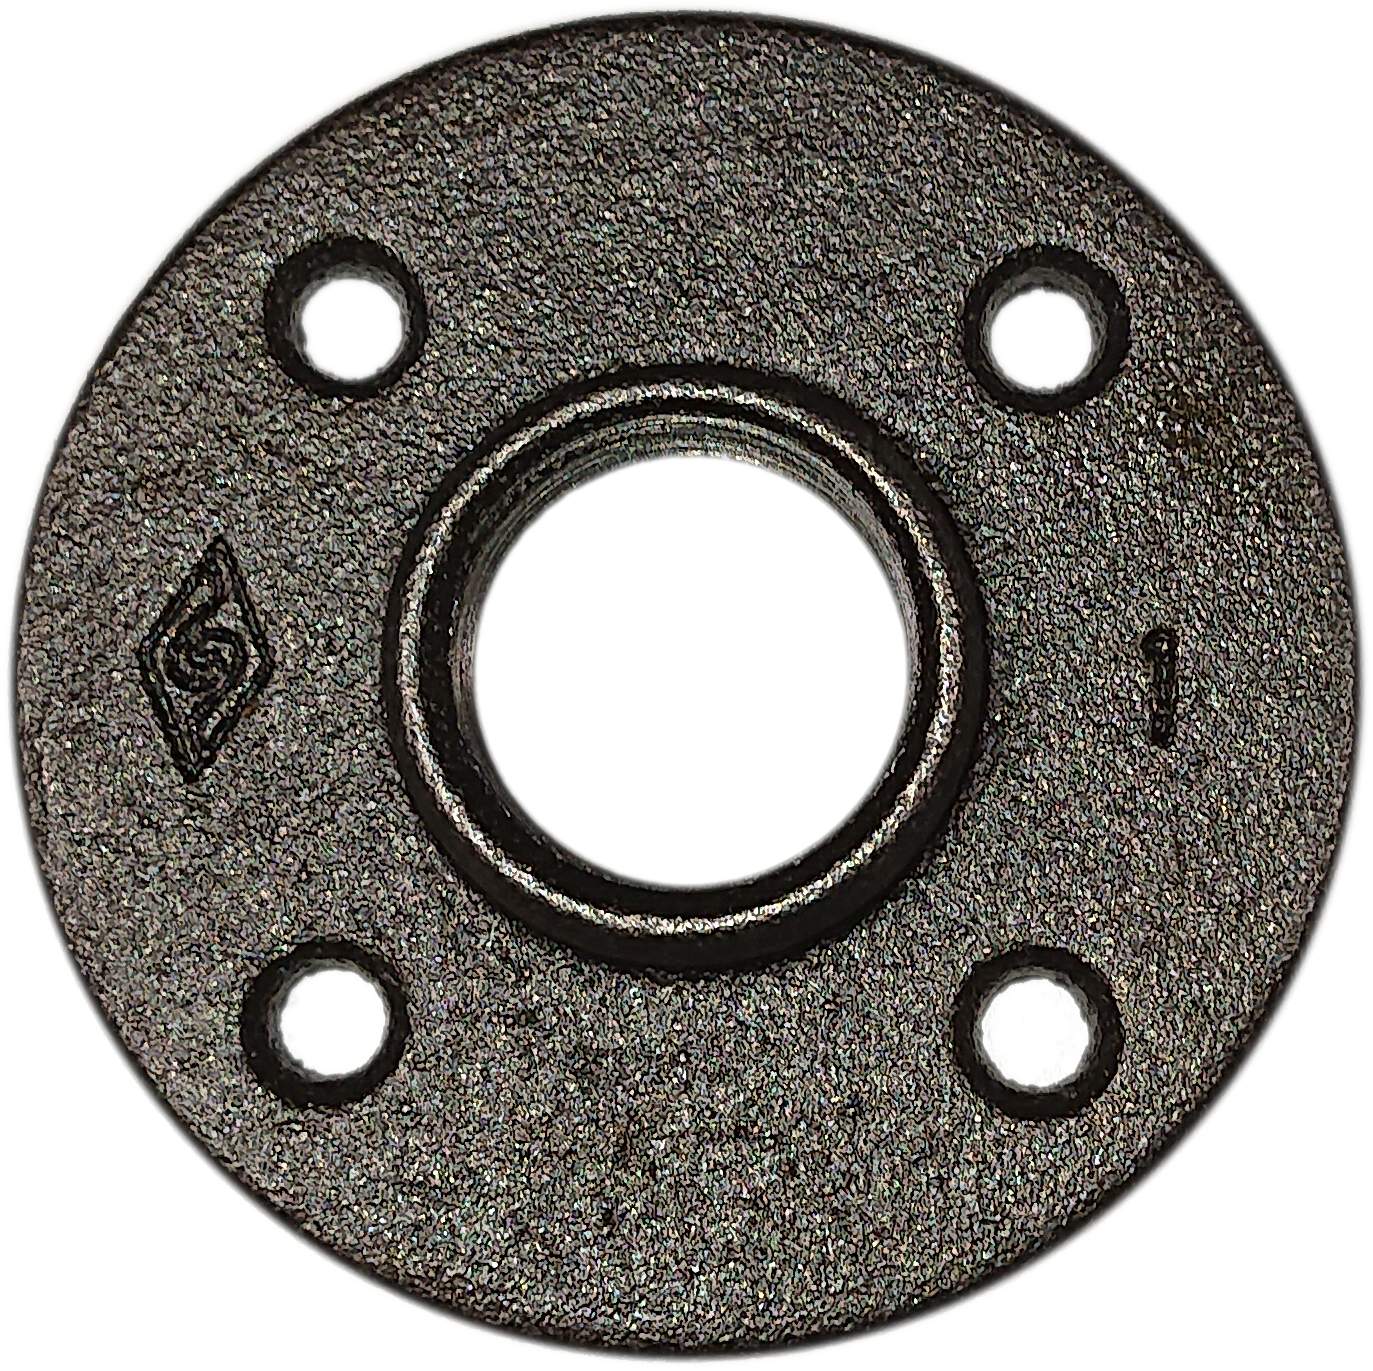 Black round threaded flange 26x34 with 4 fixing holes